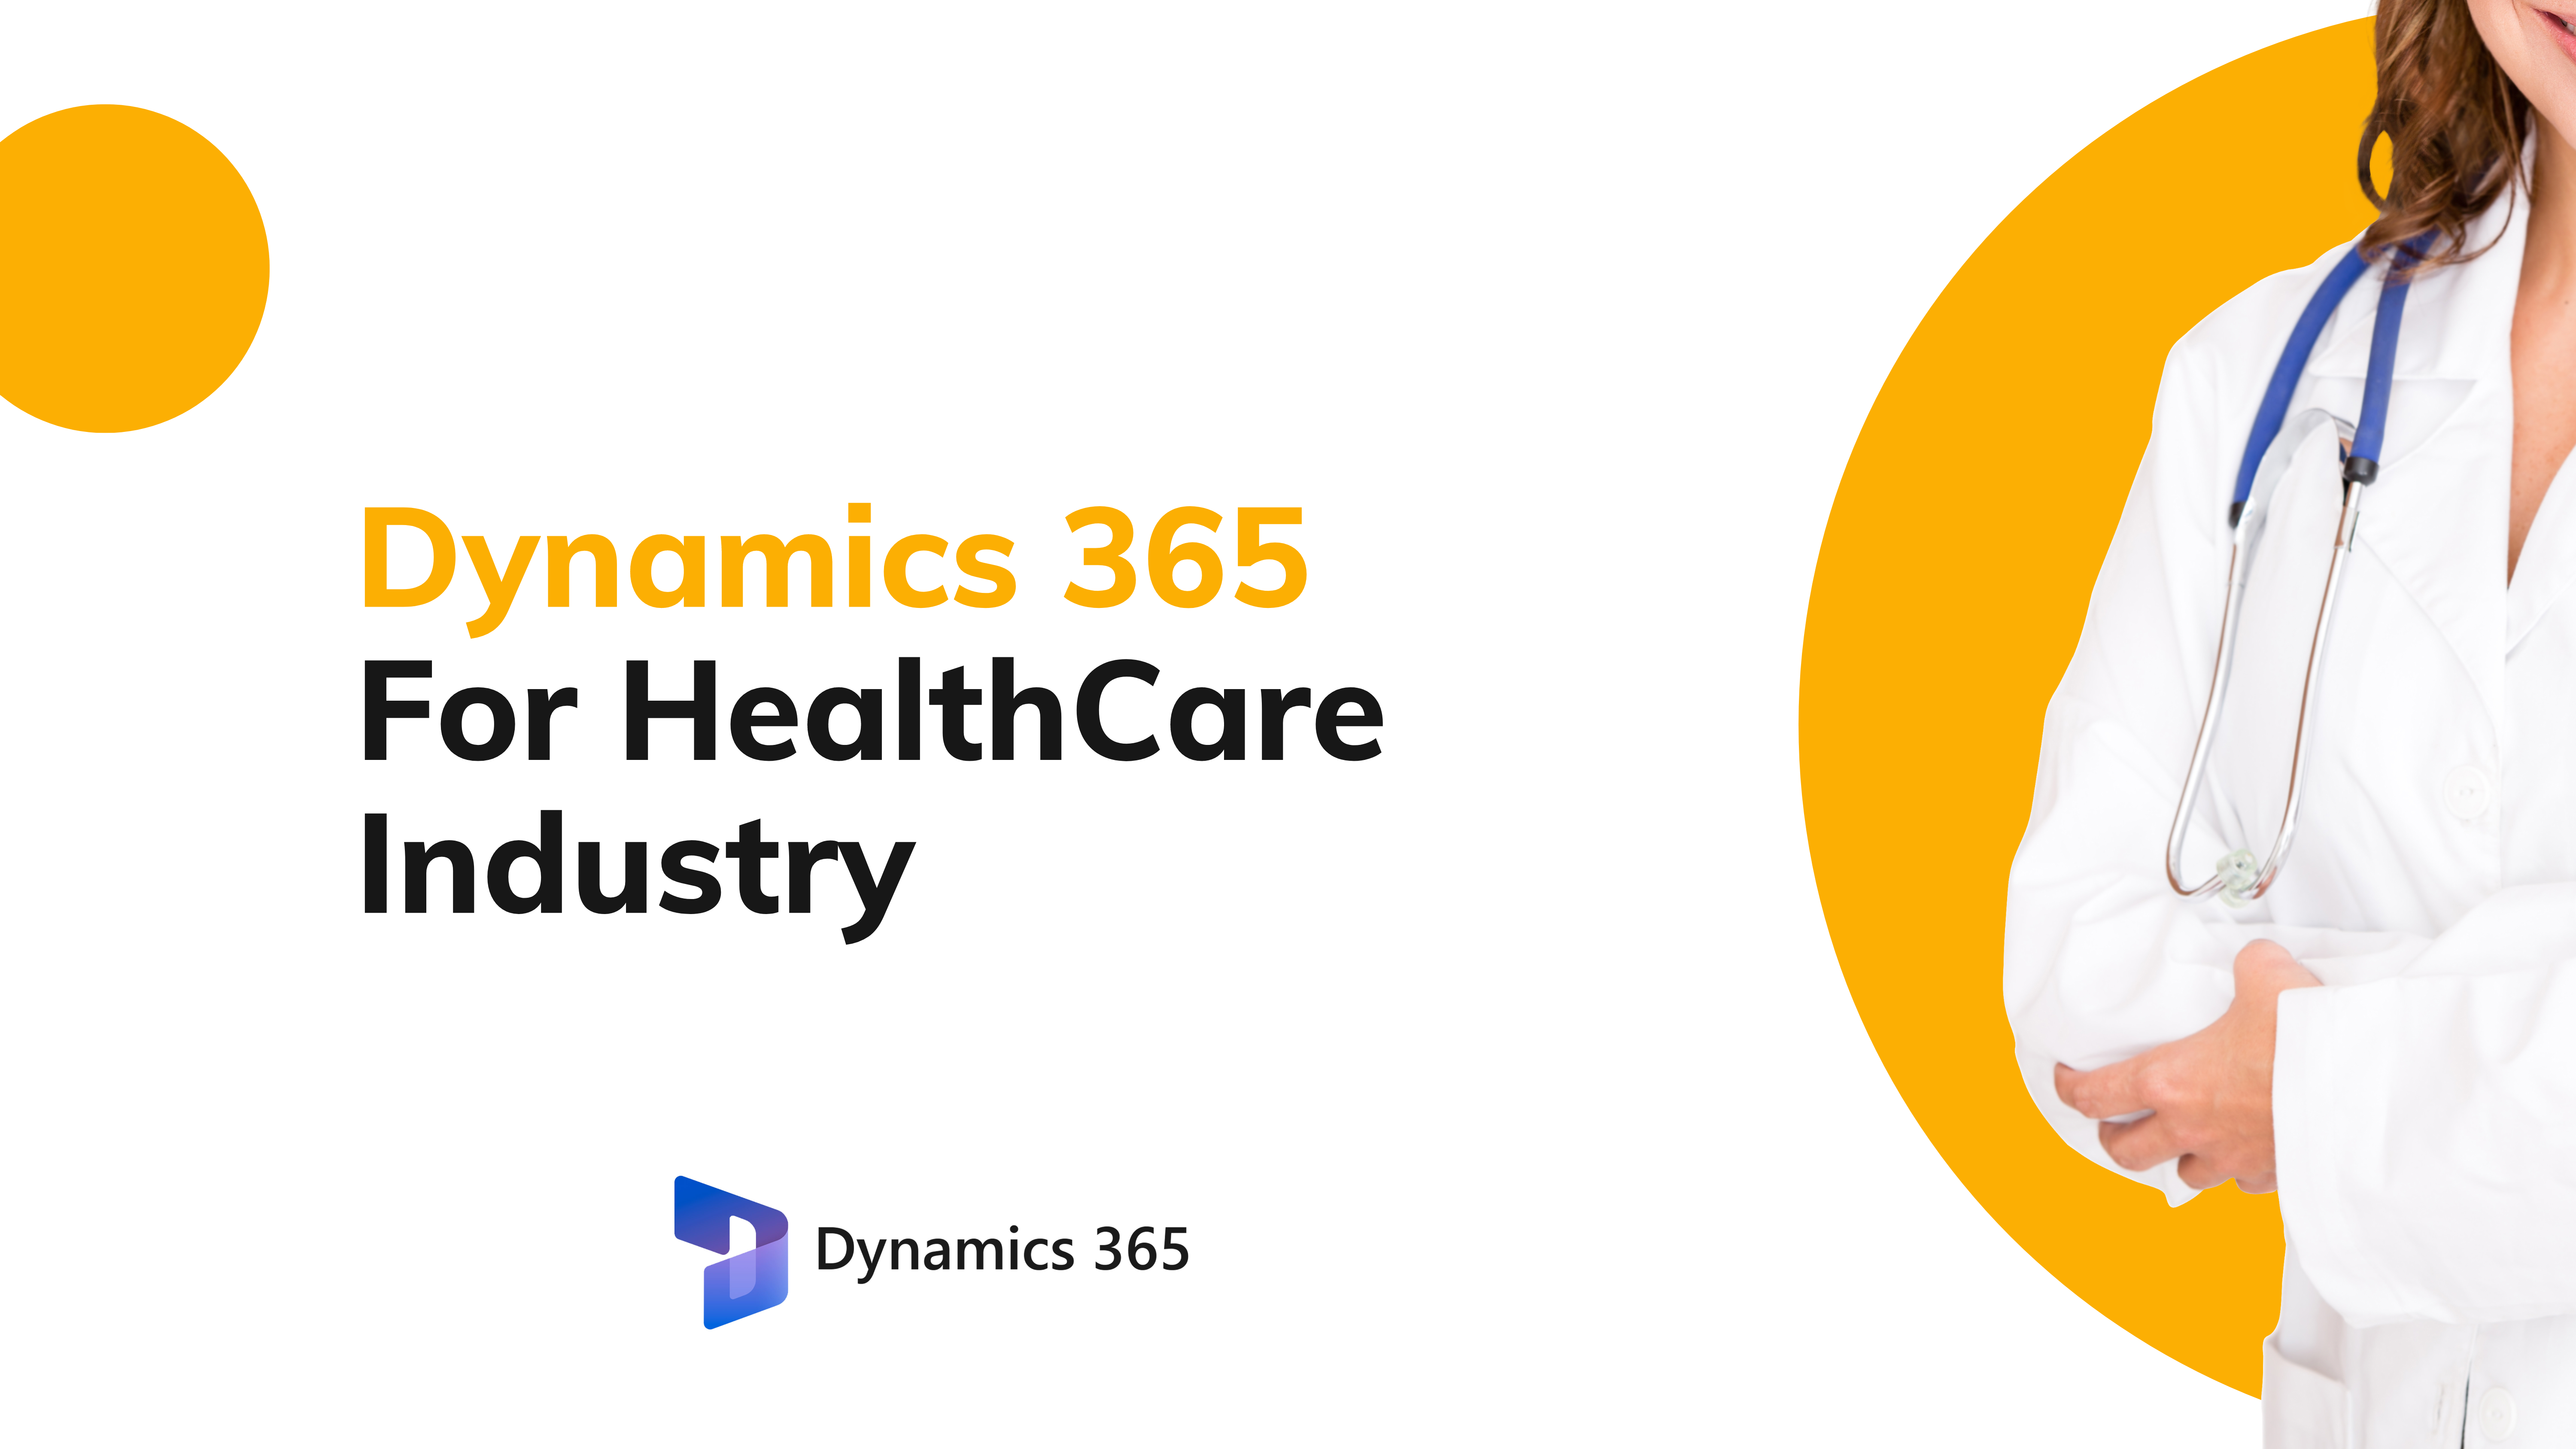 Dynamics 365 For HealthCare